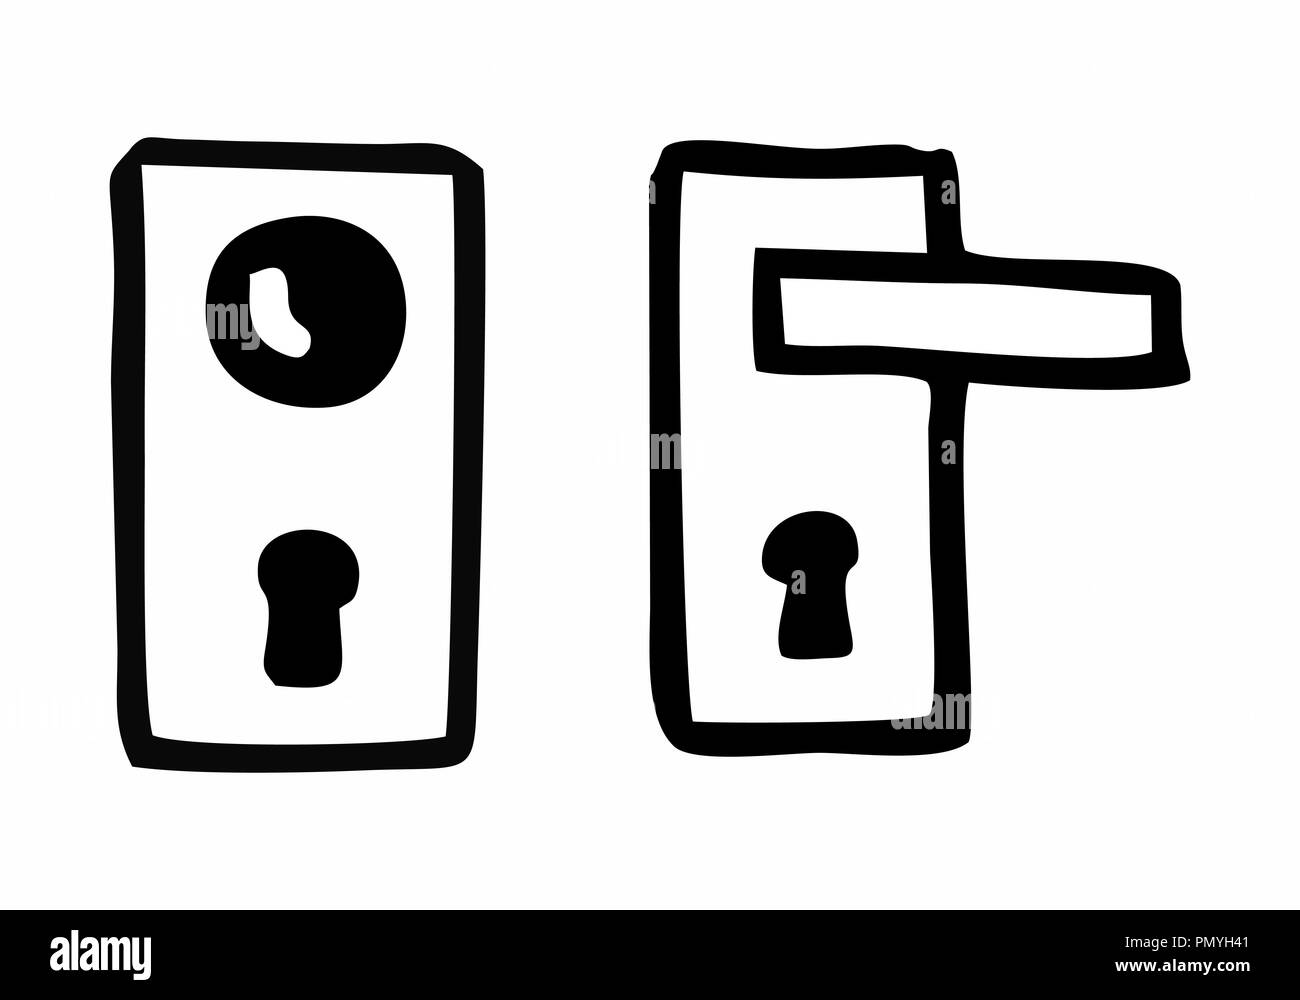 Freehand illustration of isolated door locks. Black outlines on white background. Stock Vector